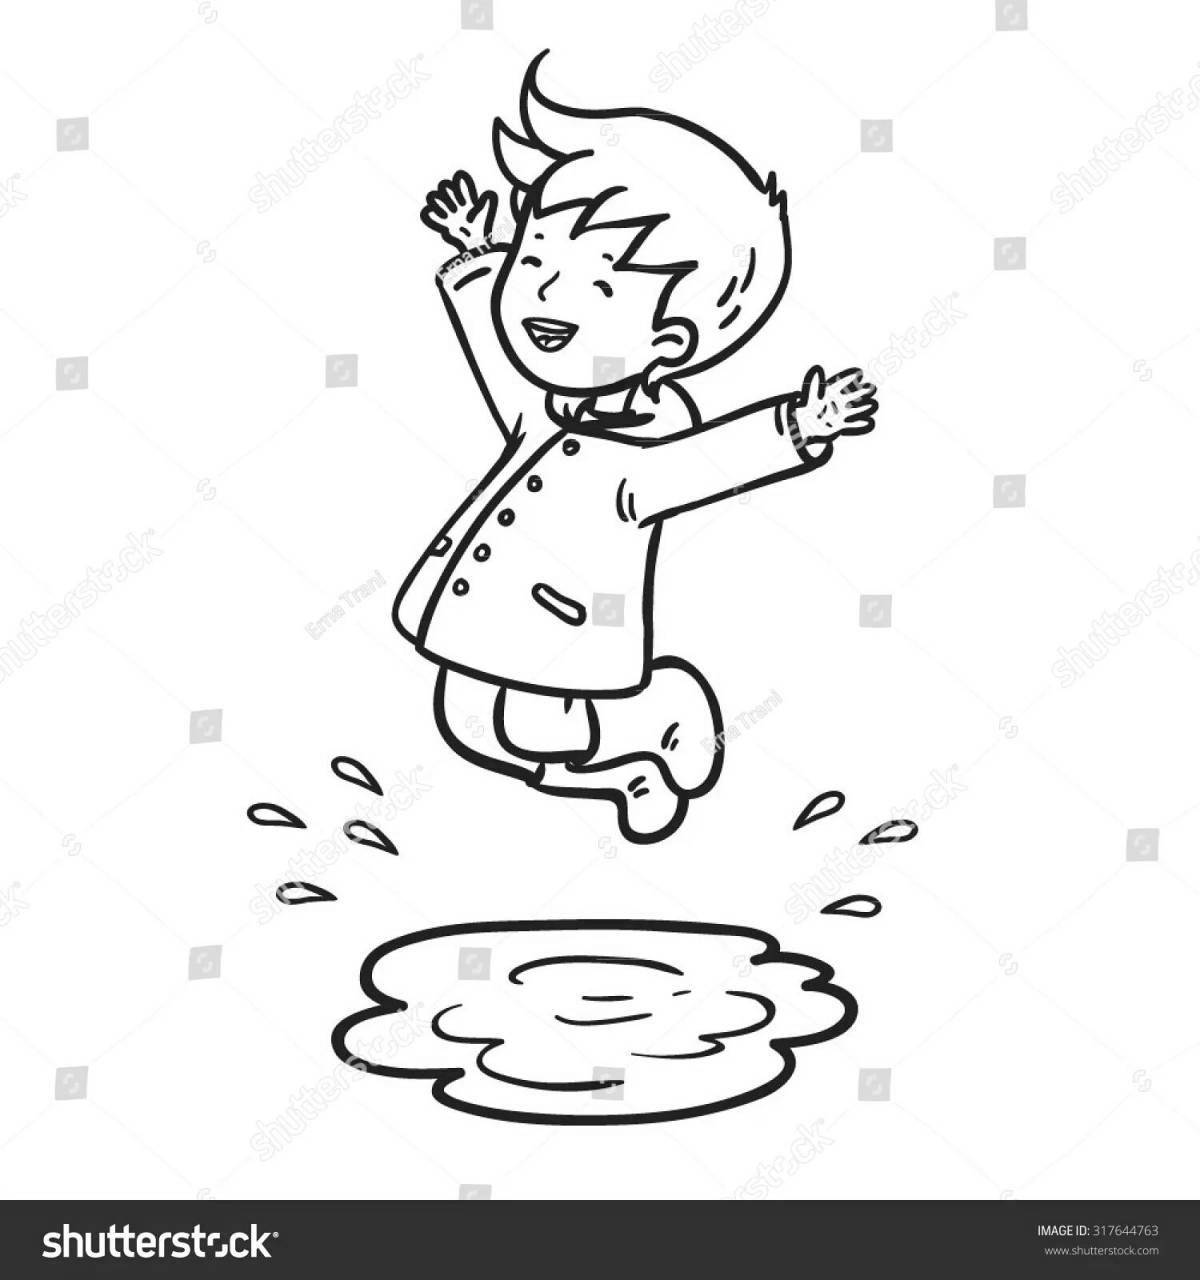 Adorable puddle coloring page